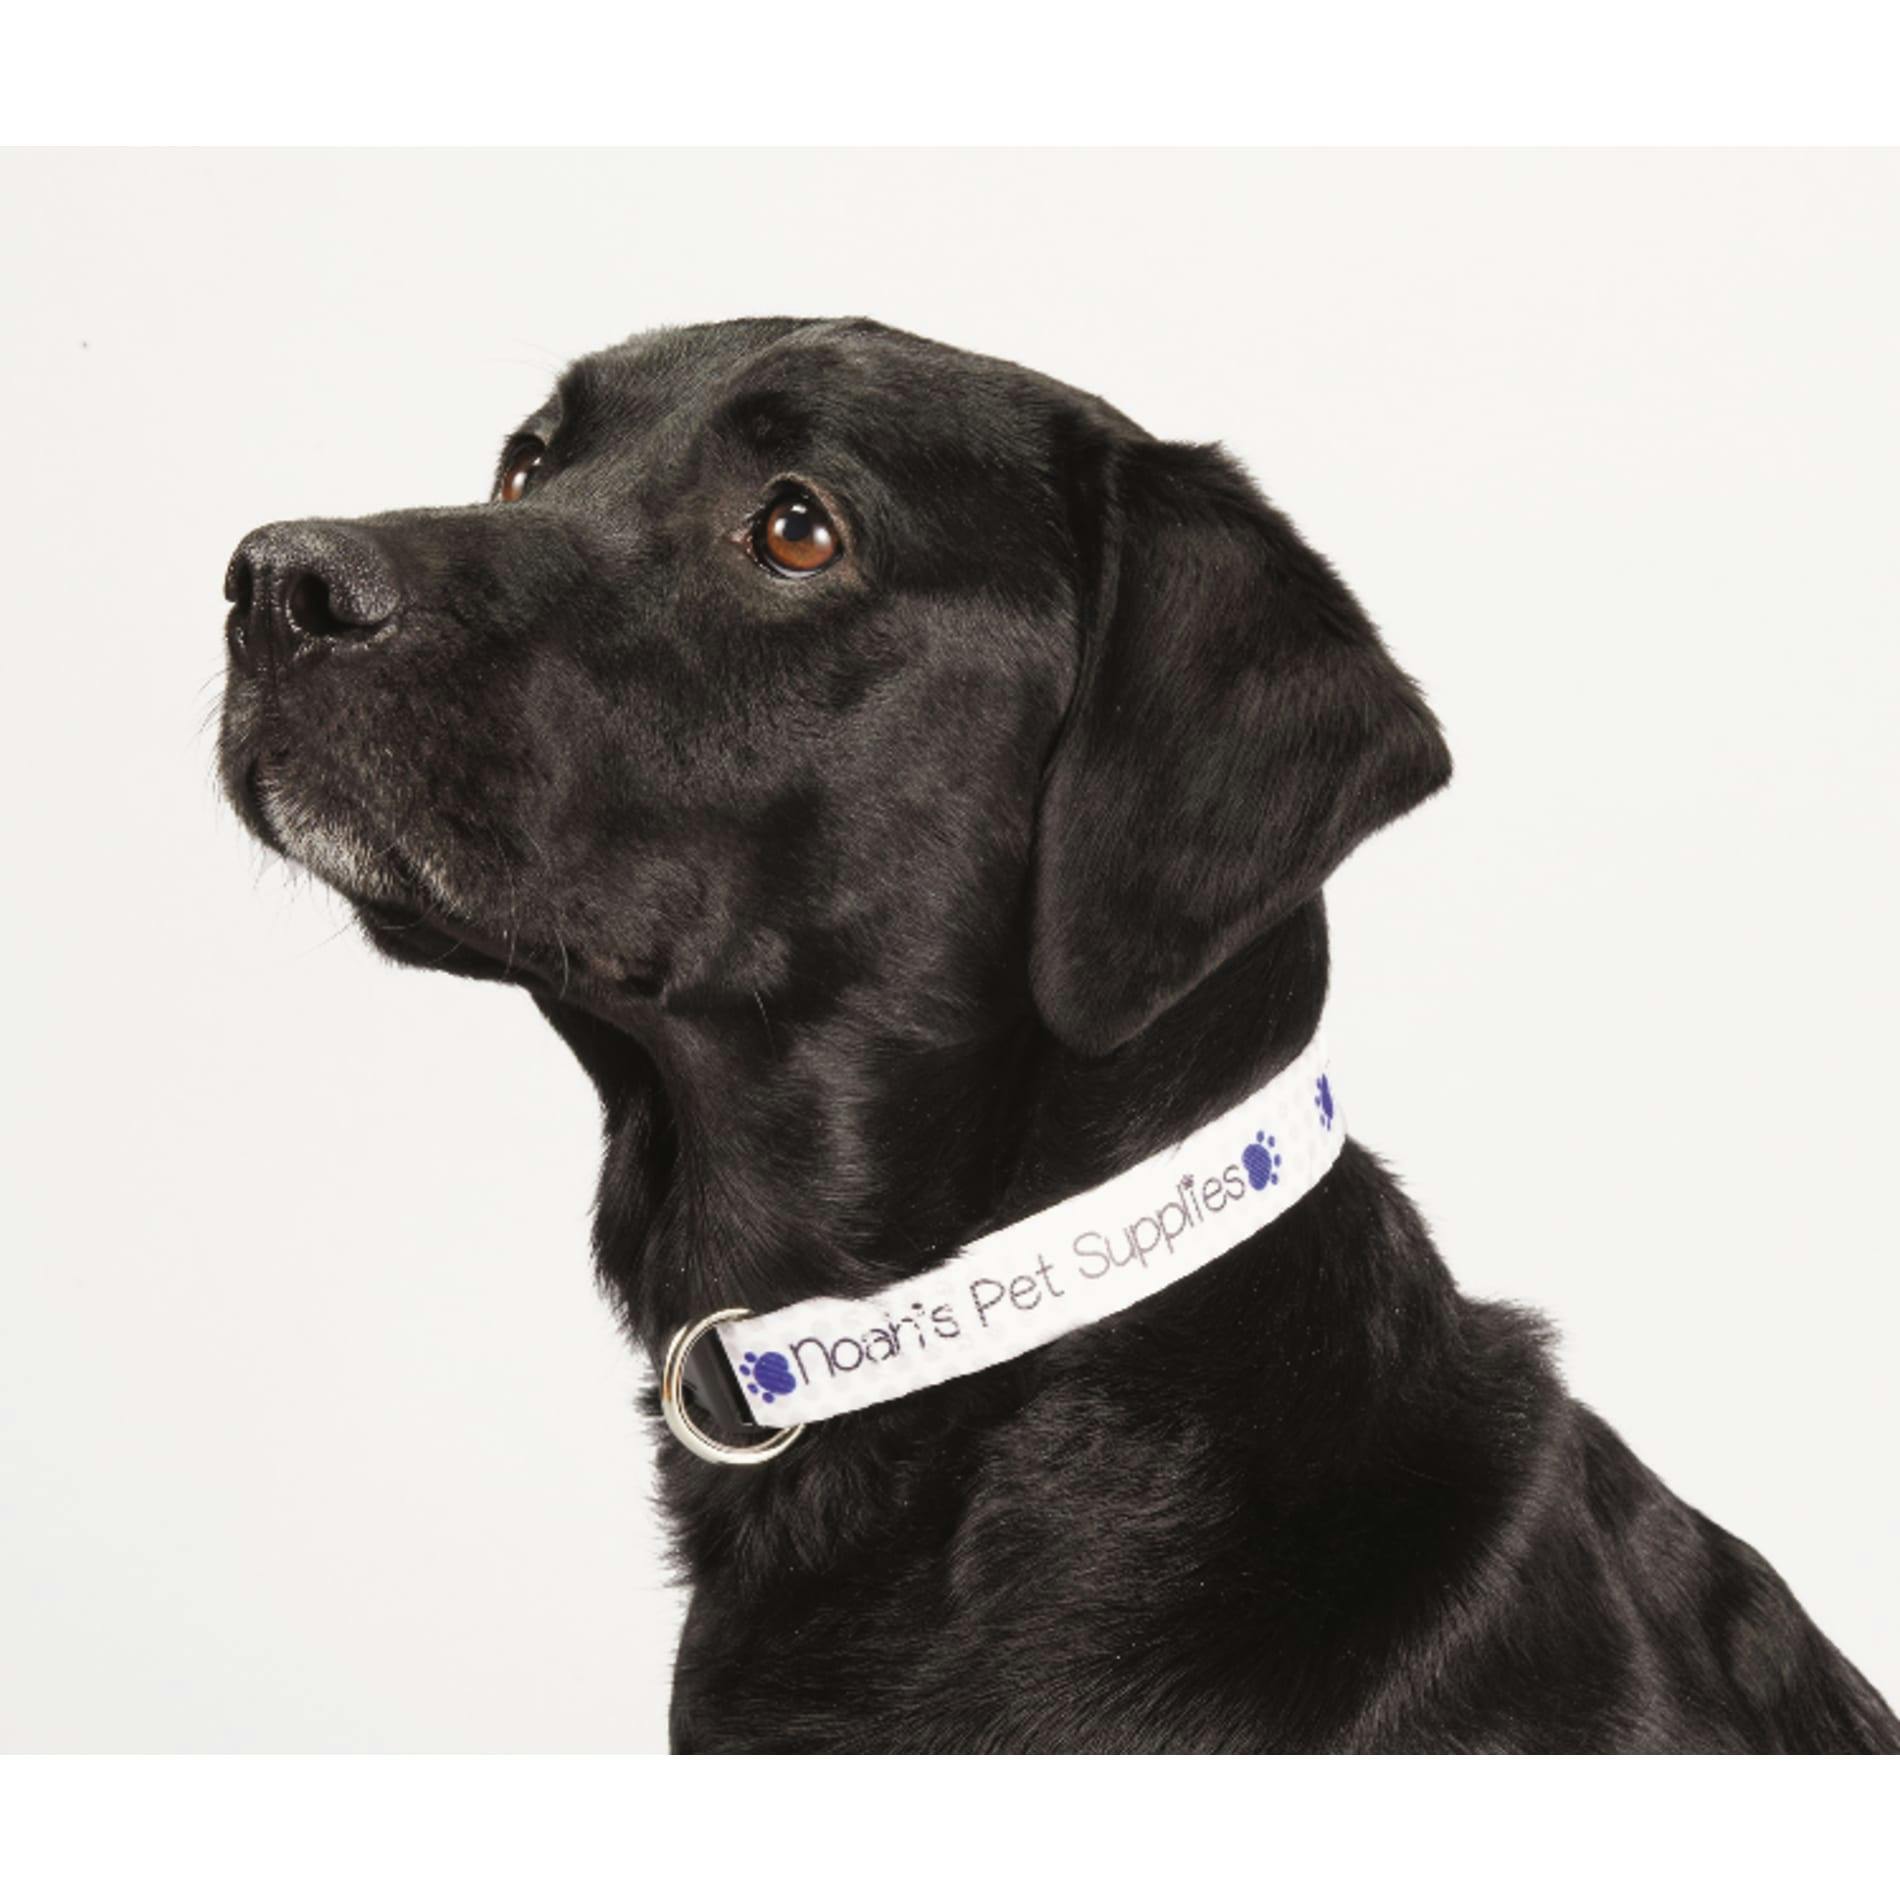 Full Color 1" Wide Adjustable Pet Collar - additional Image 1